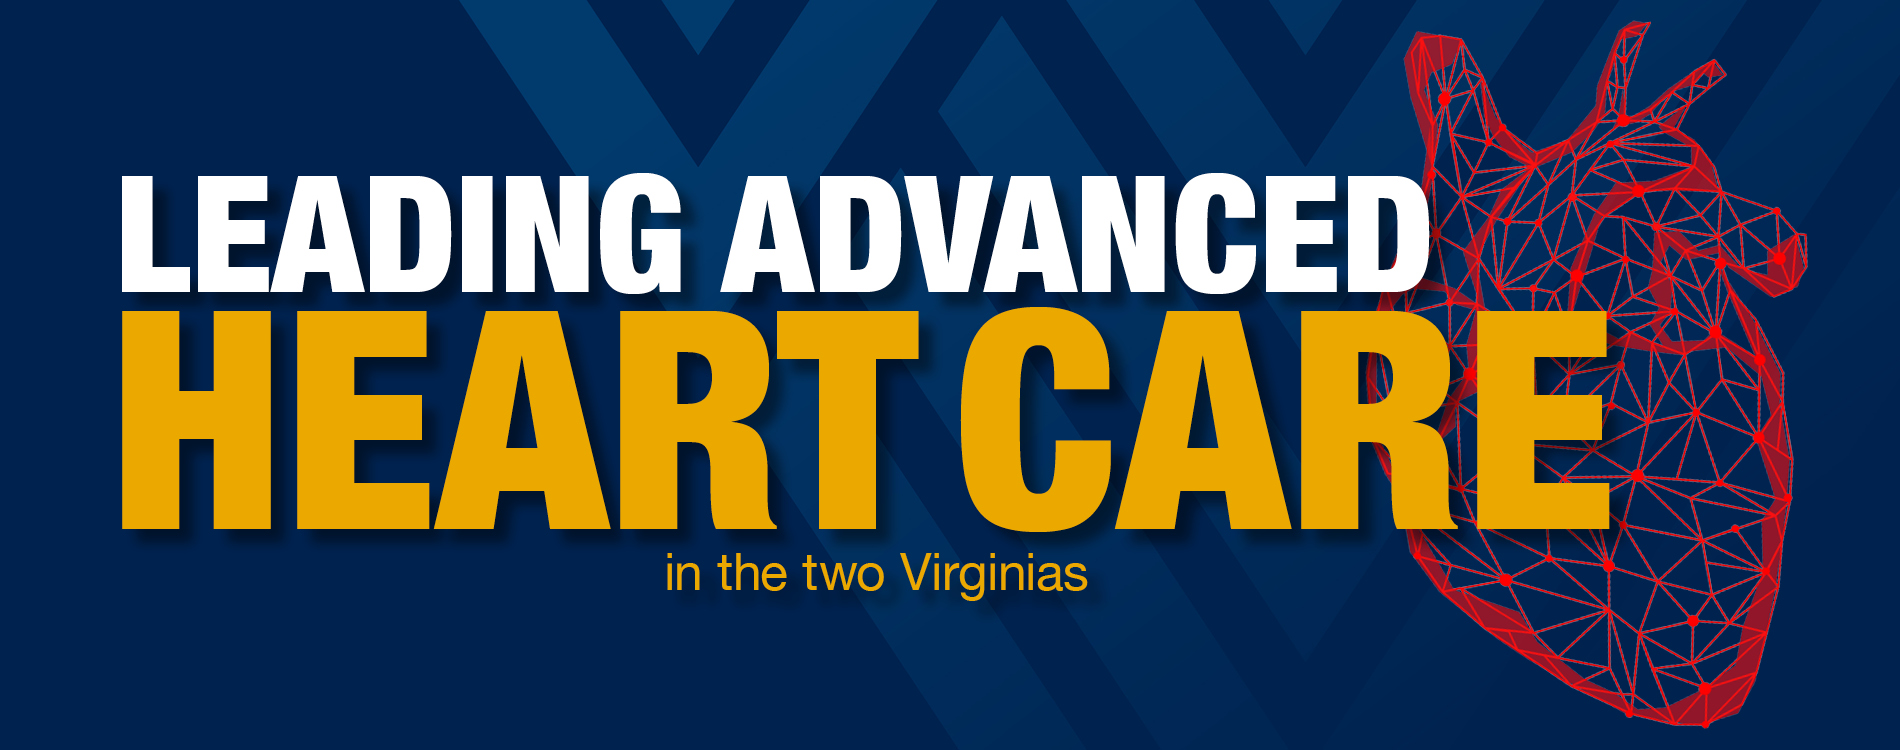 Leading Advanced Heart Care in the two Virginias